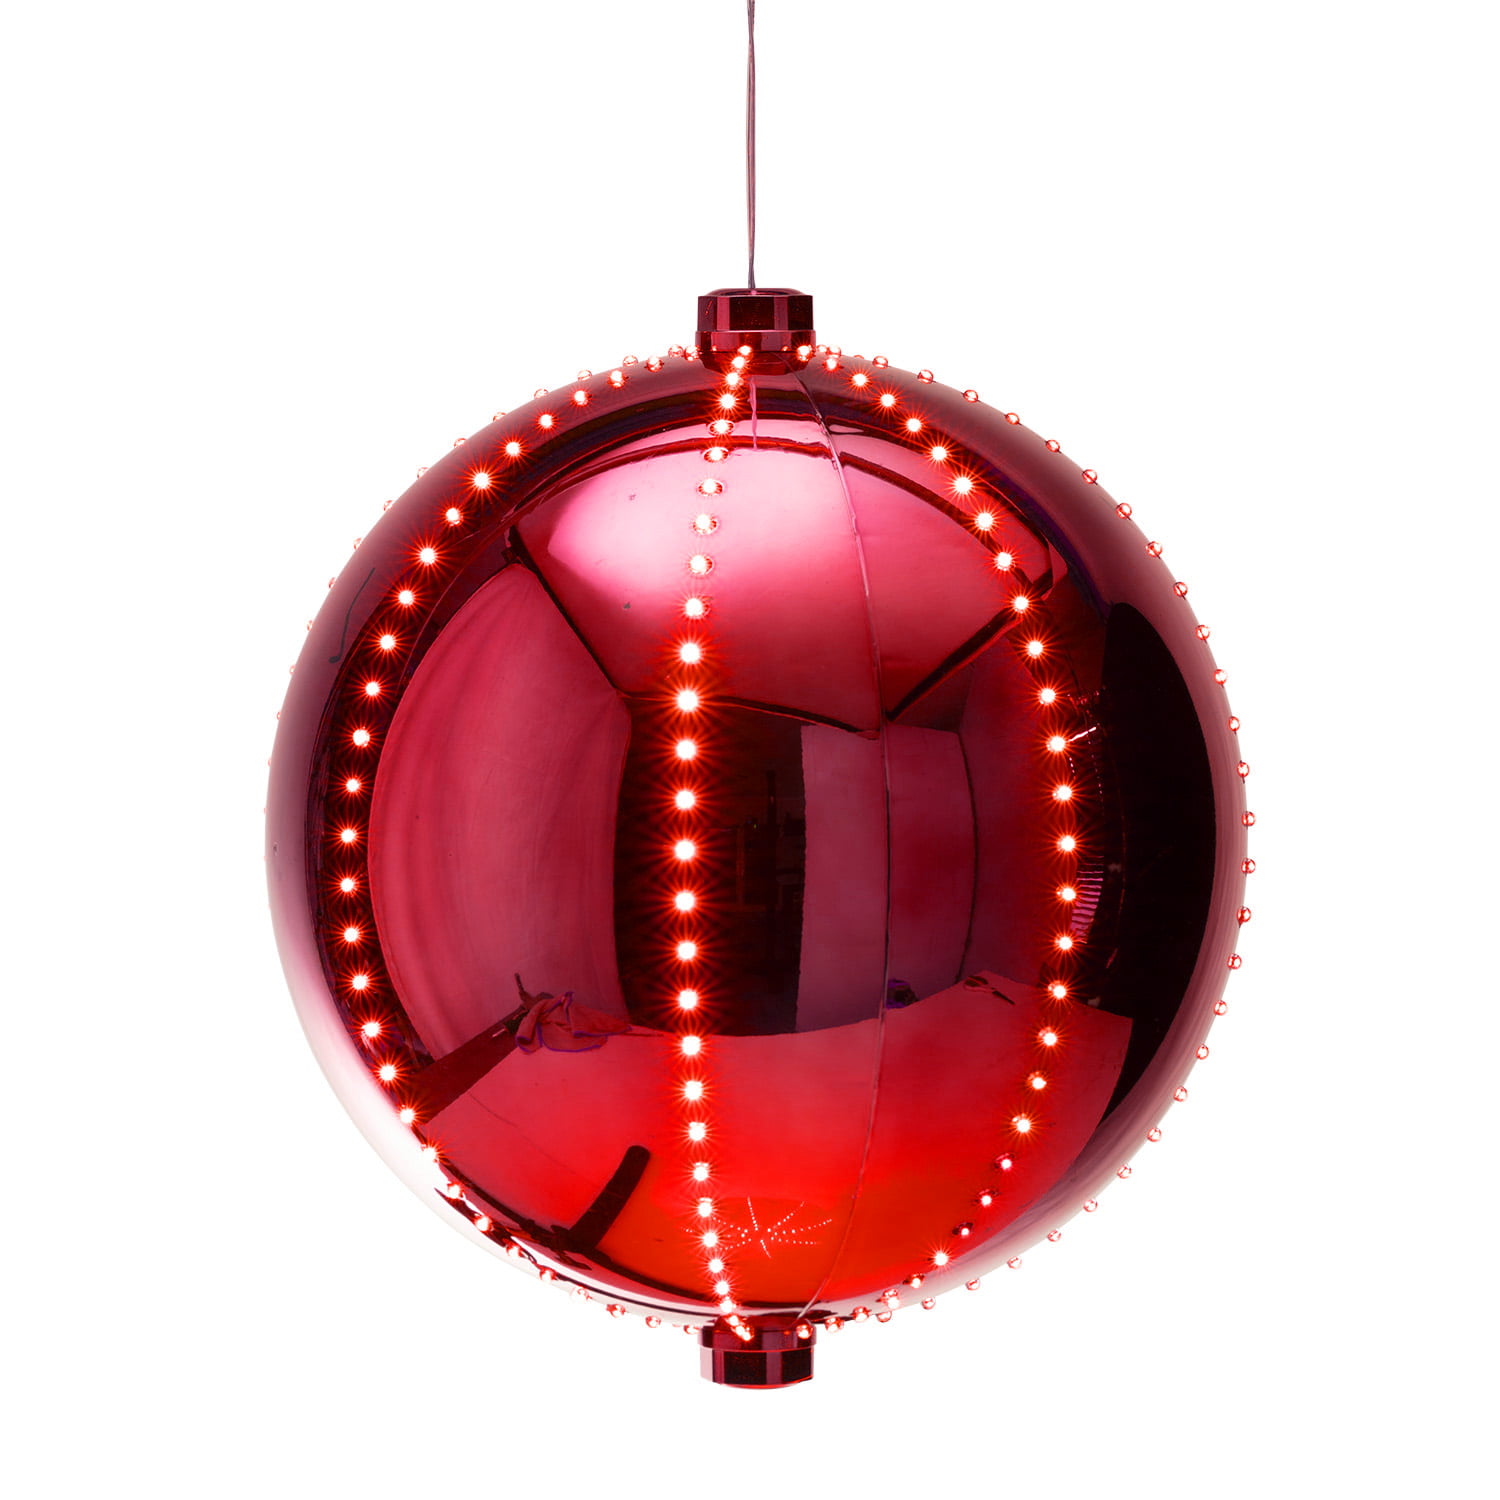 Alpine Corporation Christmas Ball Ornament with Color Changing LED Light Red Indoor Festive Holiday Décor for Home 